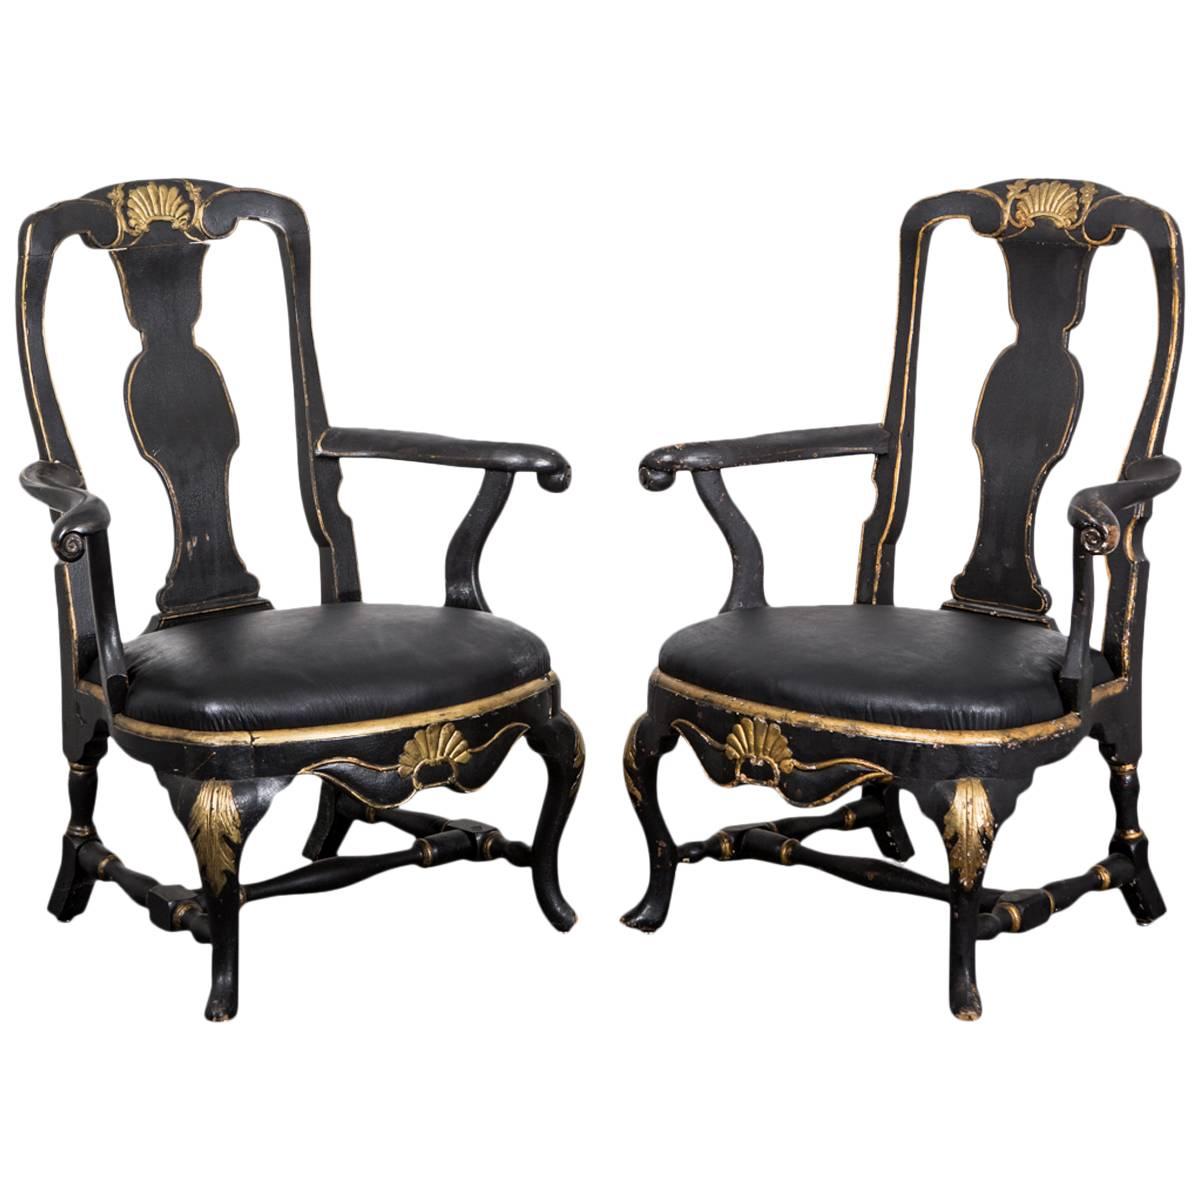 Armchairs Swedish Rococo 18th century period, Sweden. A pair of assembled Rococo armchairs. One made during the Rococo period, circa 1750 and the other made during the 1800s in Sweden. Black painted base with gilded carvings. Both chairs are